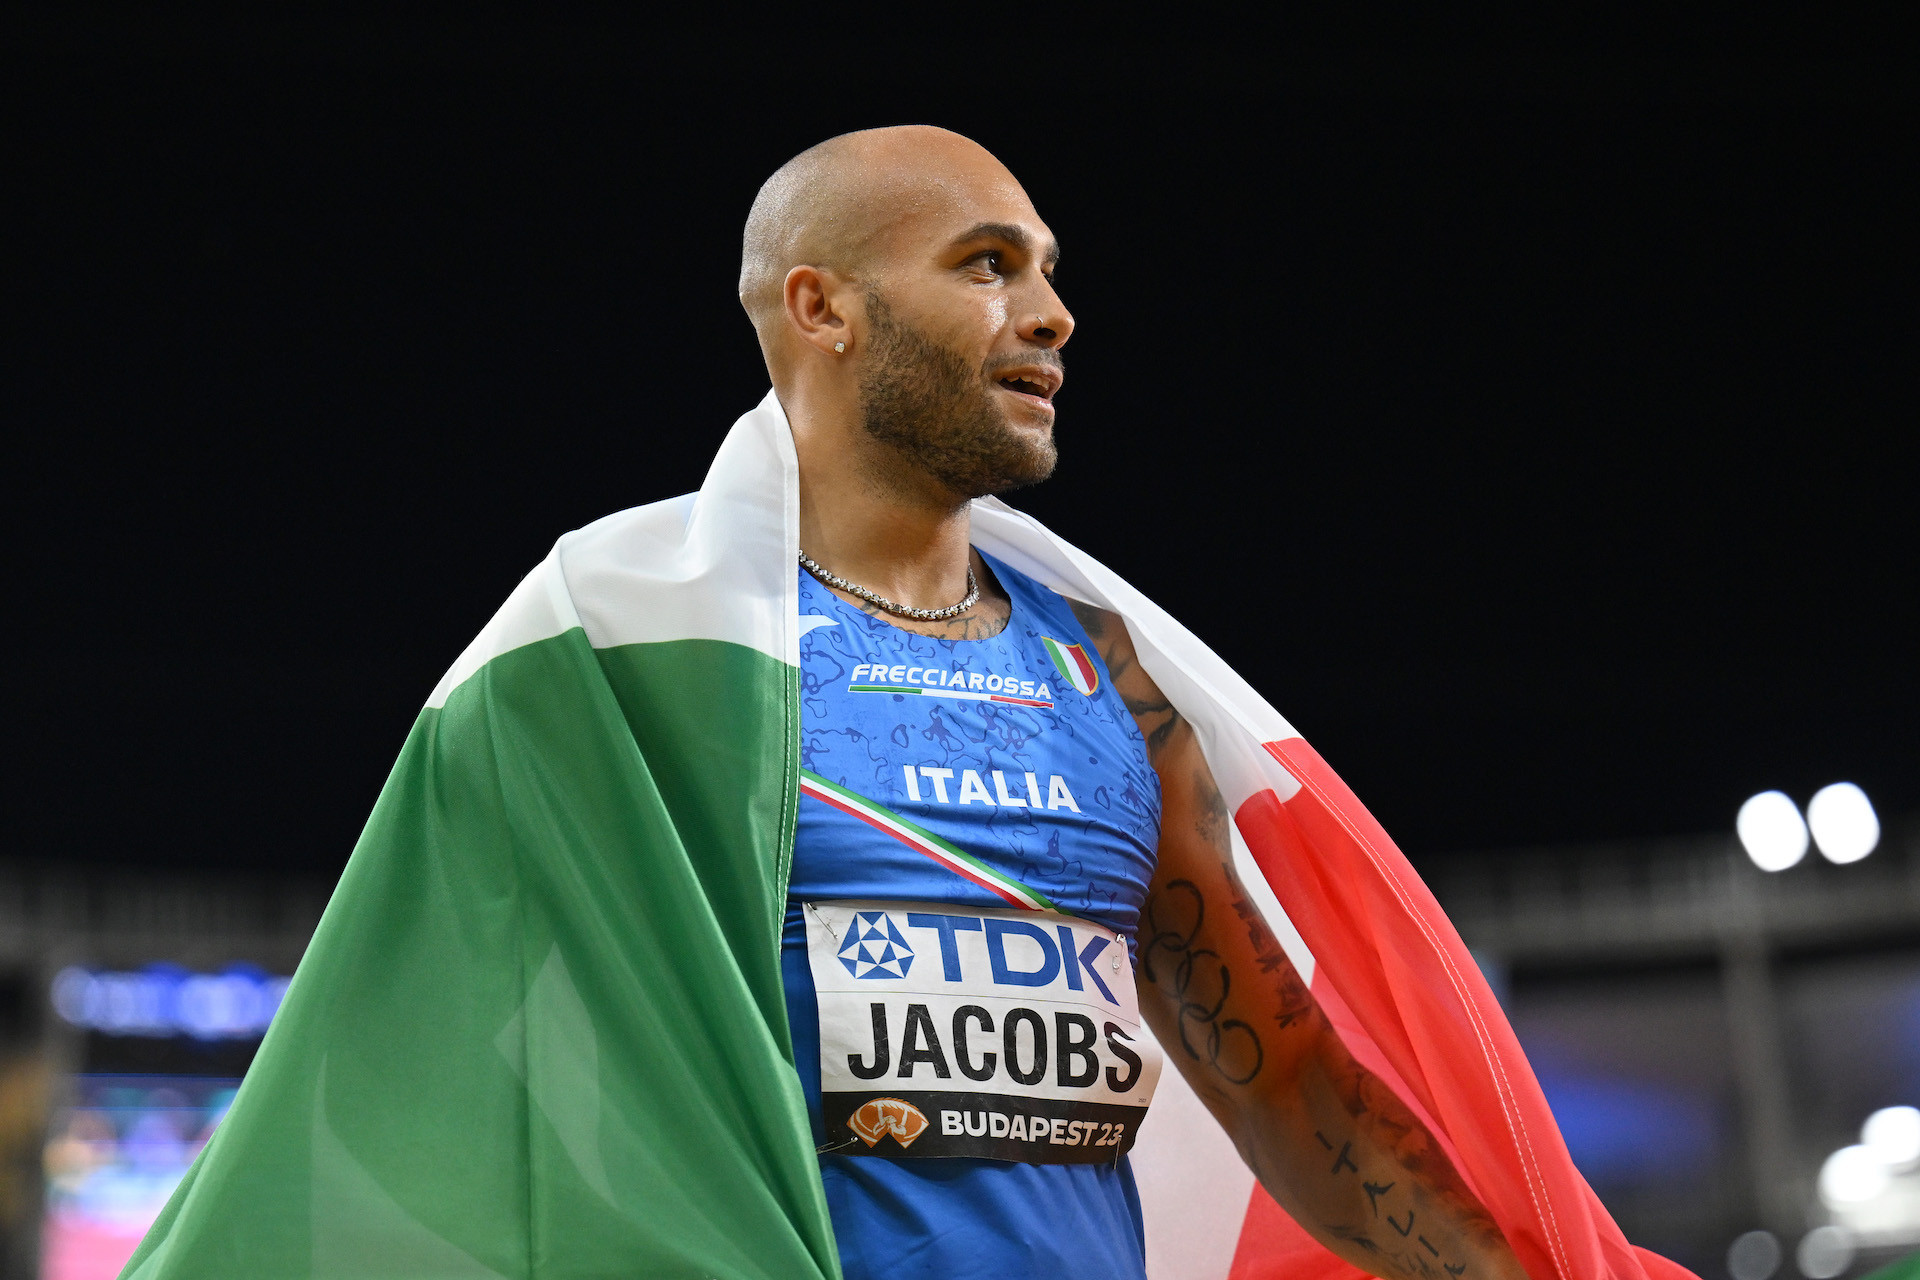 Marcell Jacobs representing Italy at the World Athletics Championships Budapest 2023. GETTY IMAGES